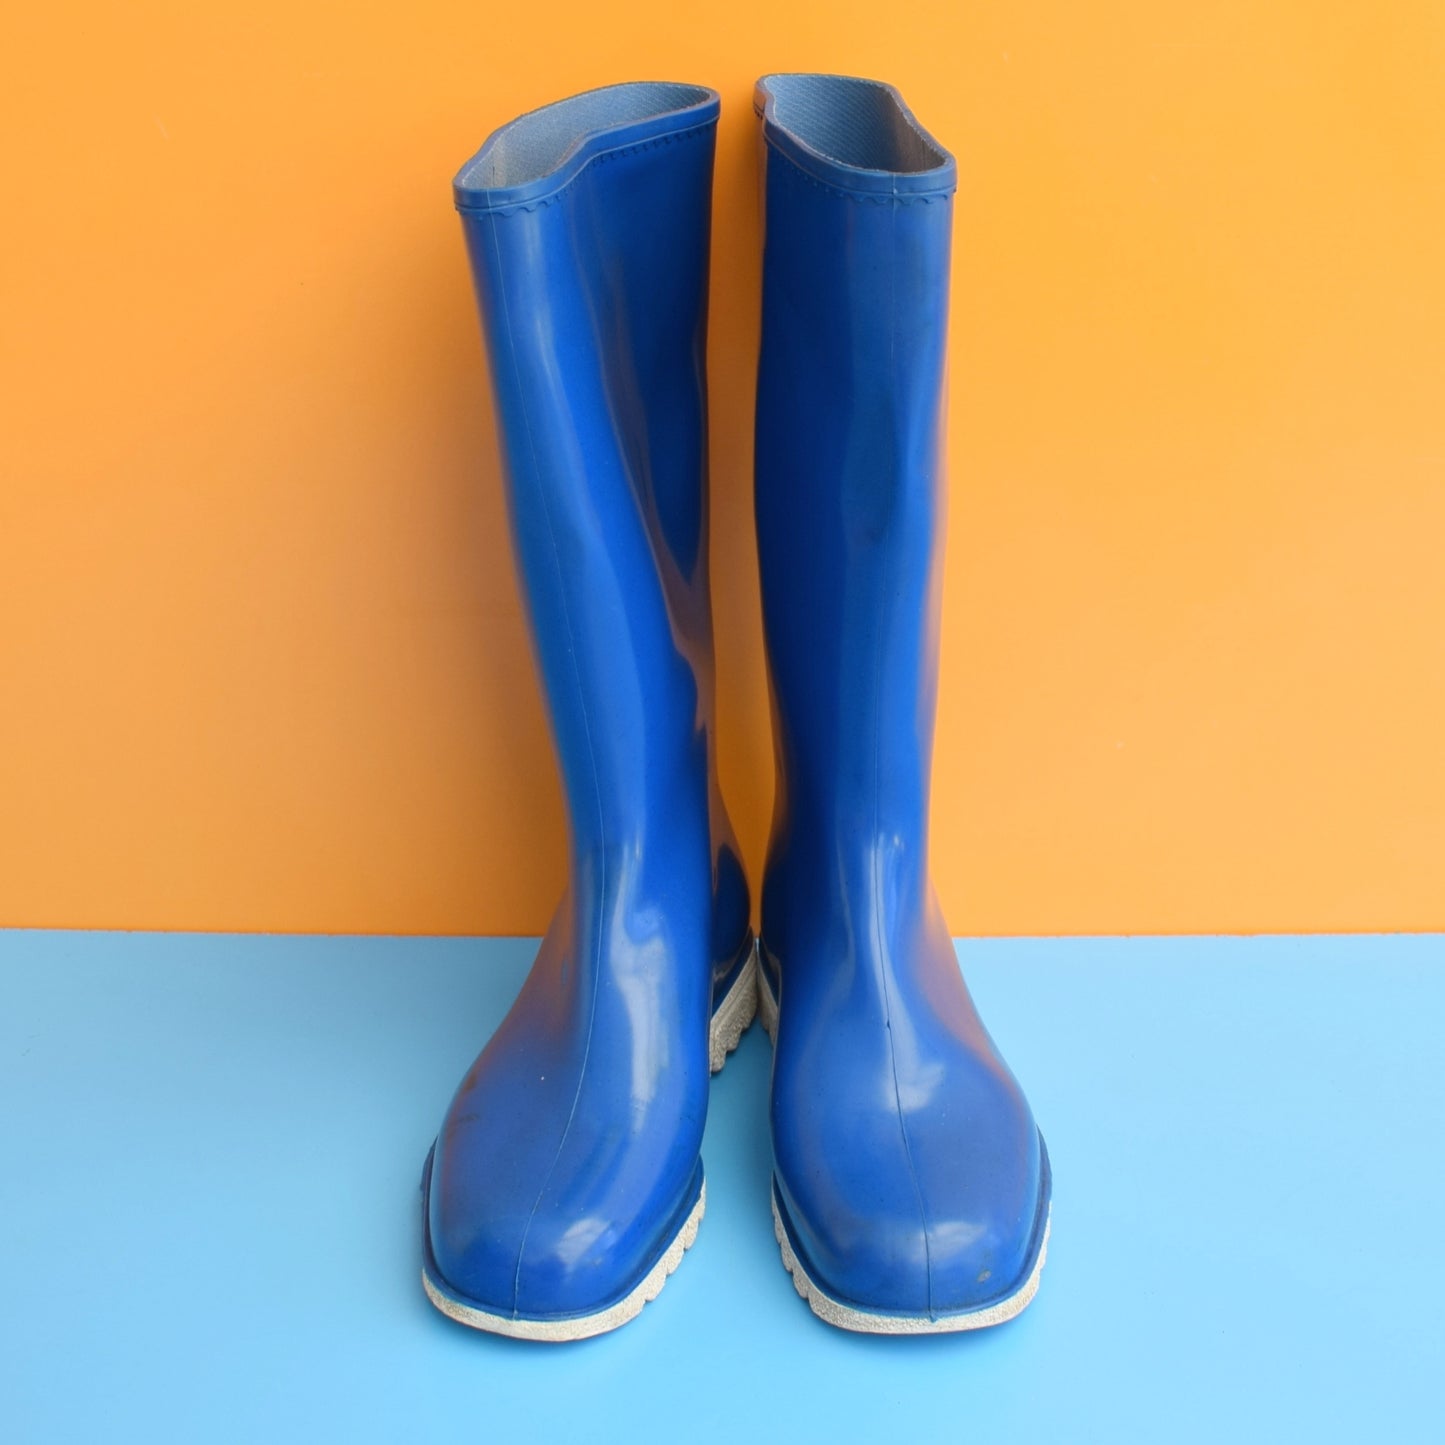 Vintage 1970s Dunlop Welly Boots - Blue 4